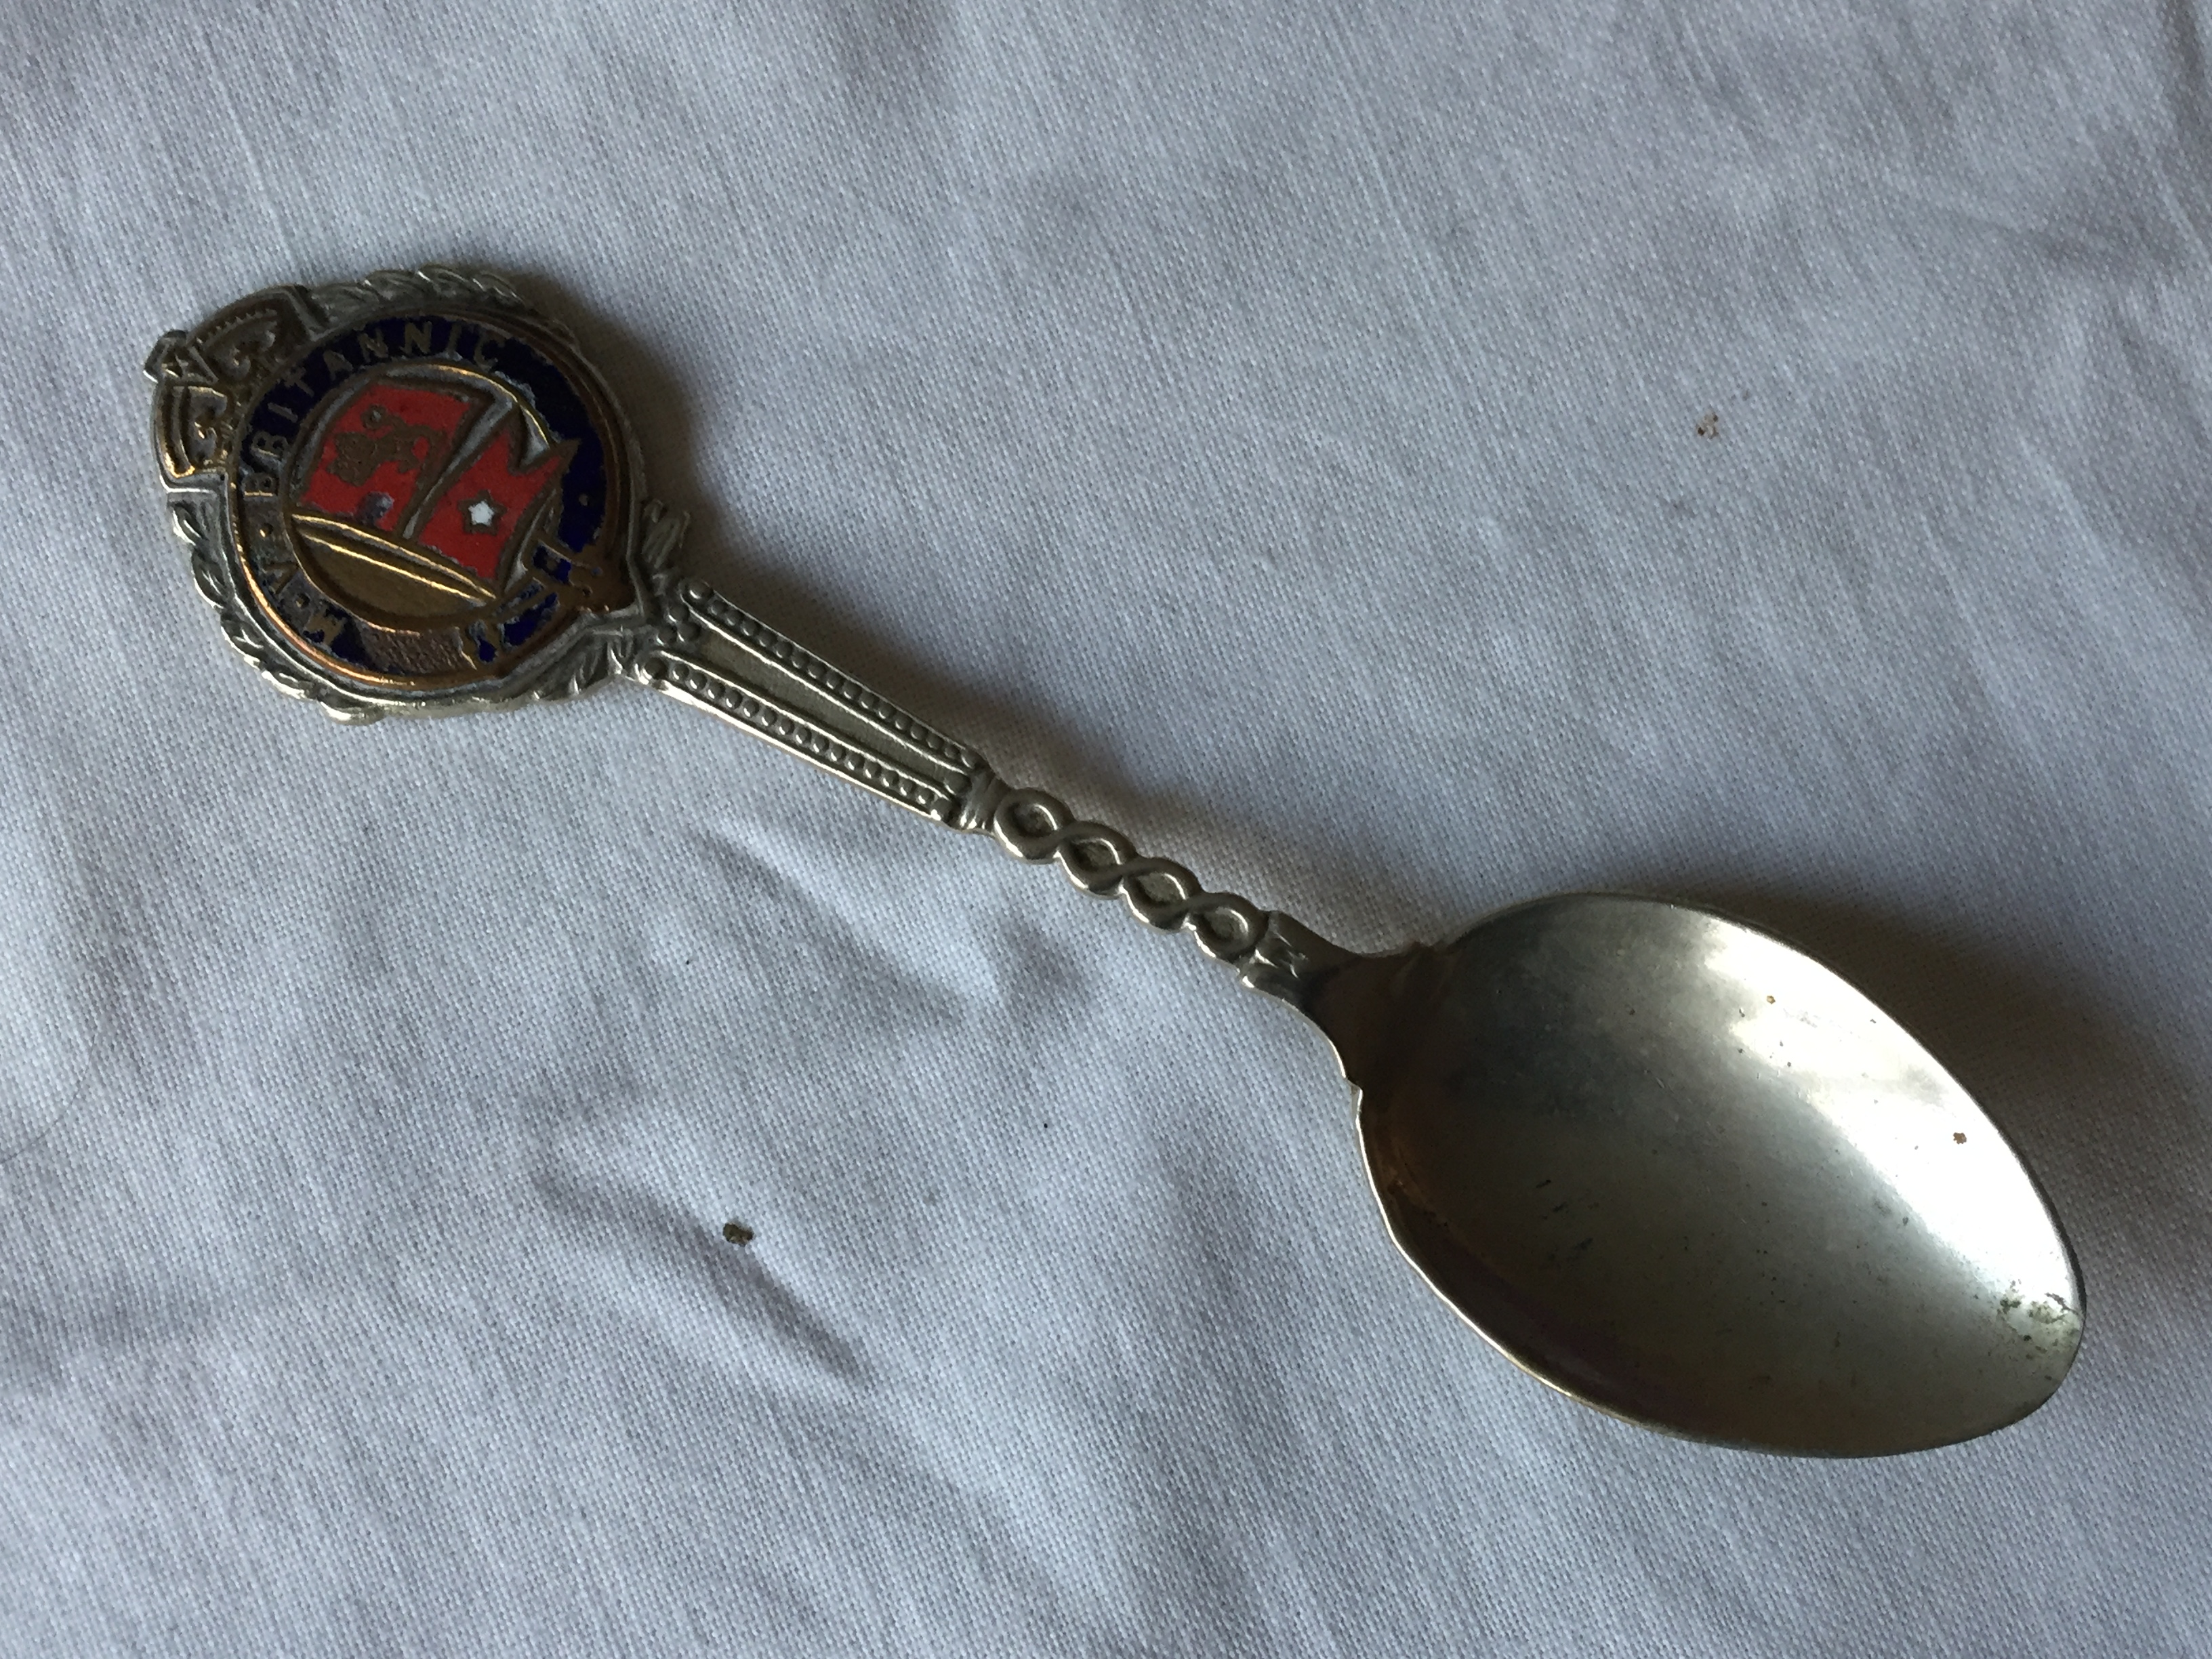 VERY RARE AND VERY EARLY SOUVENIR SPOON FROM THE WHITE STAR LINE VESSEL MV BRITANNIC 